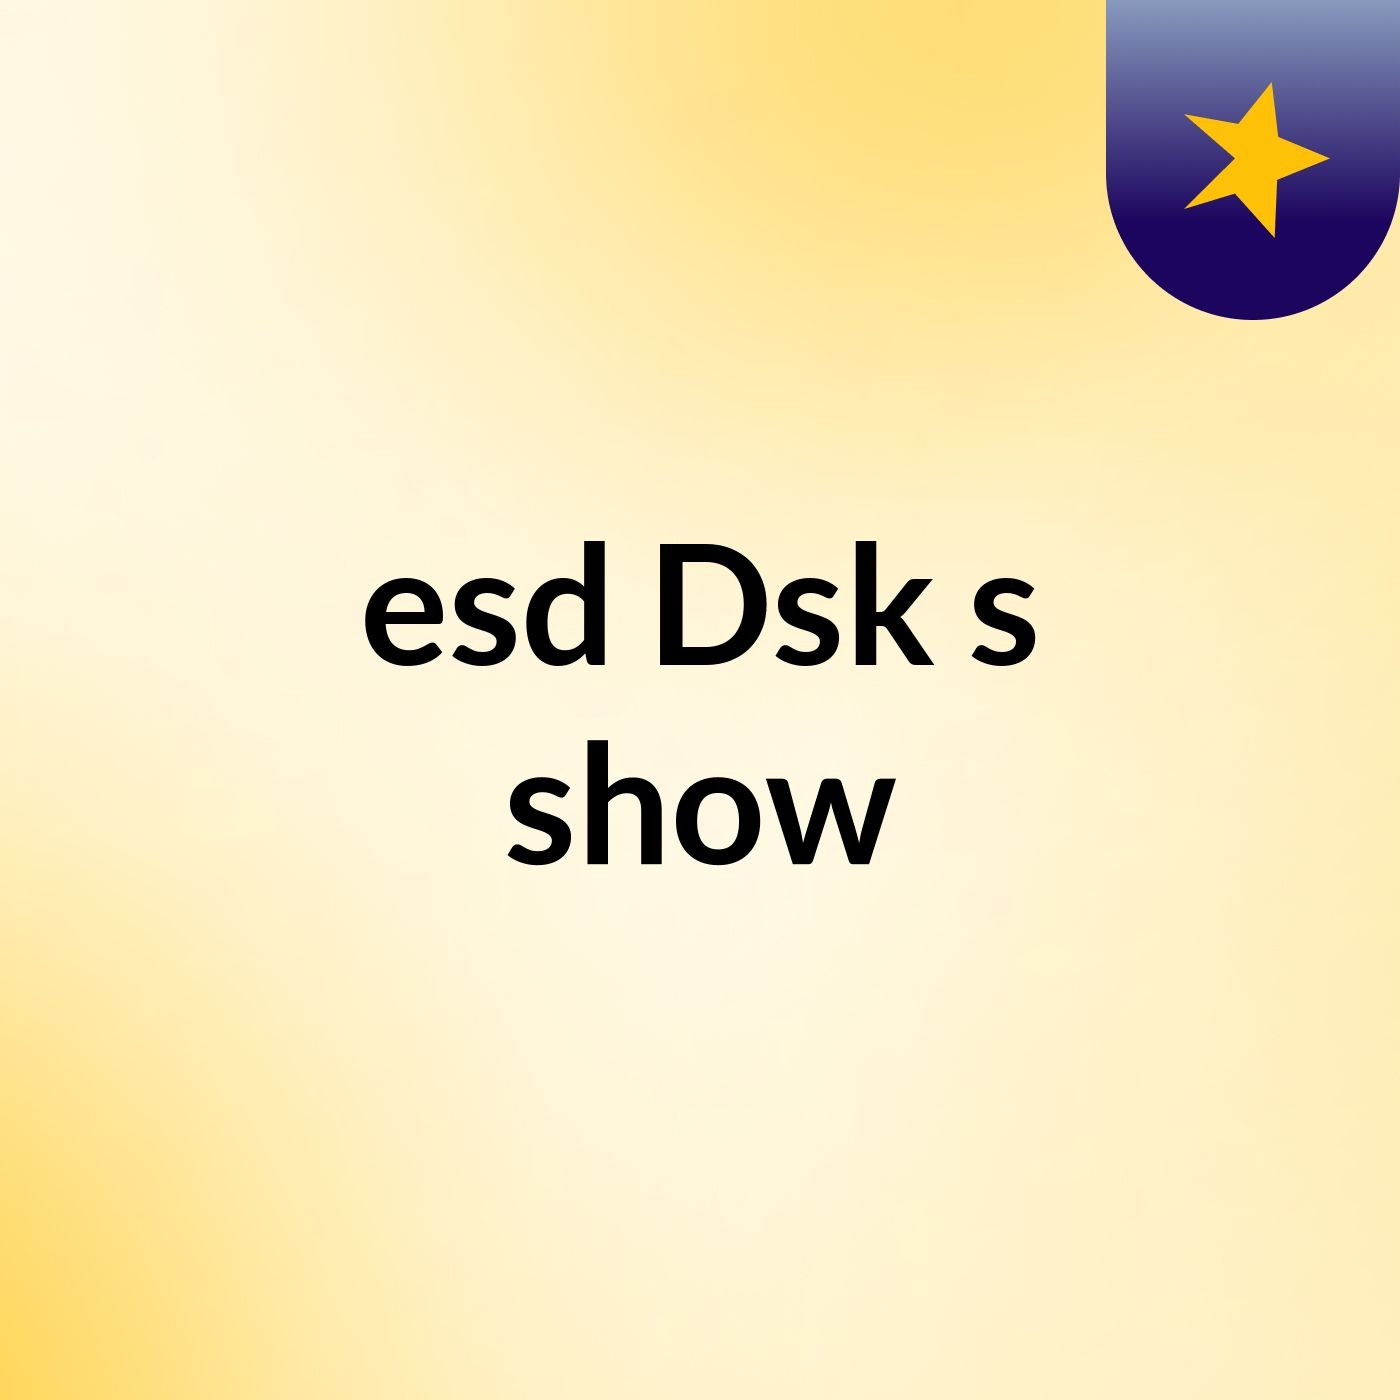 esd Dsk's show